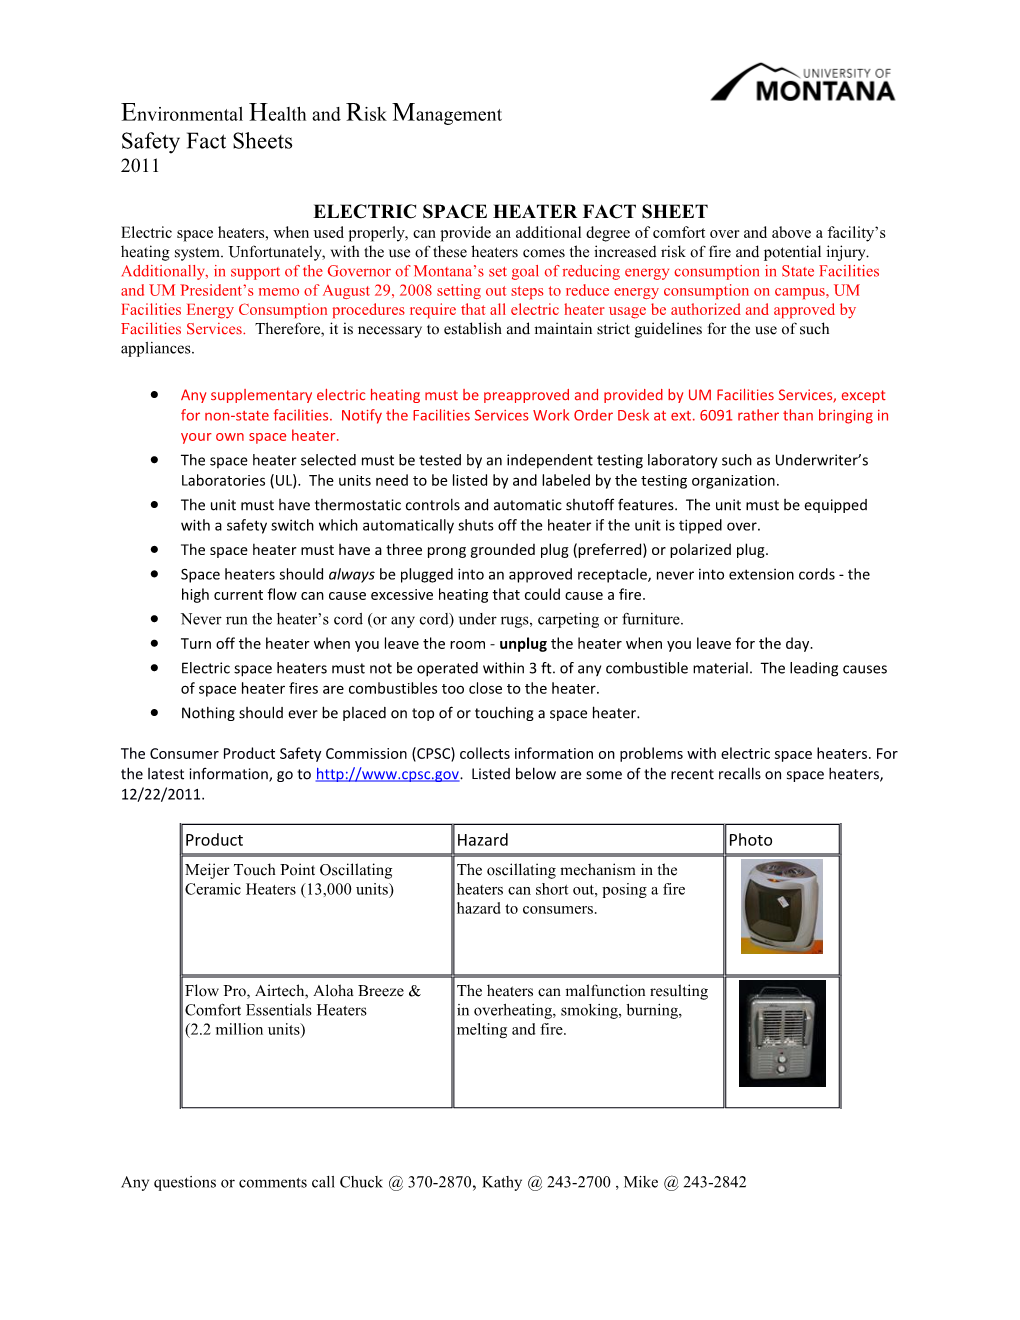 Electric Space Heater Fact Sheet